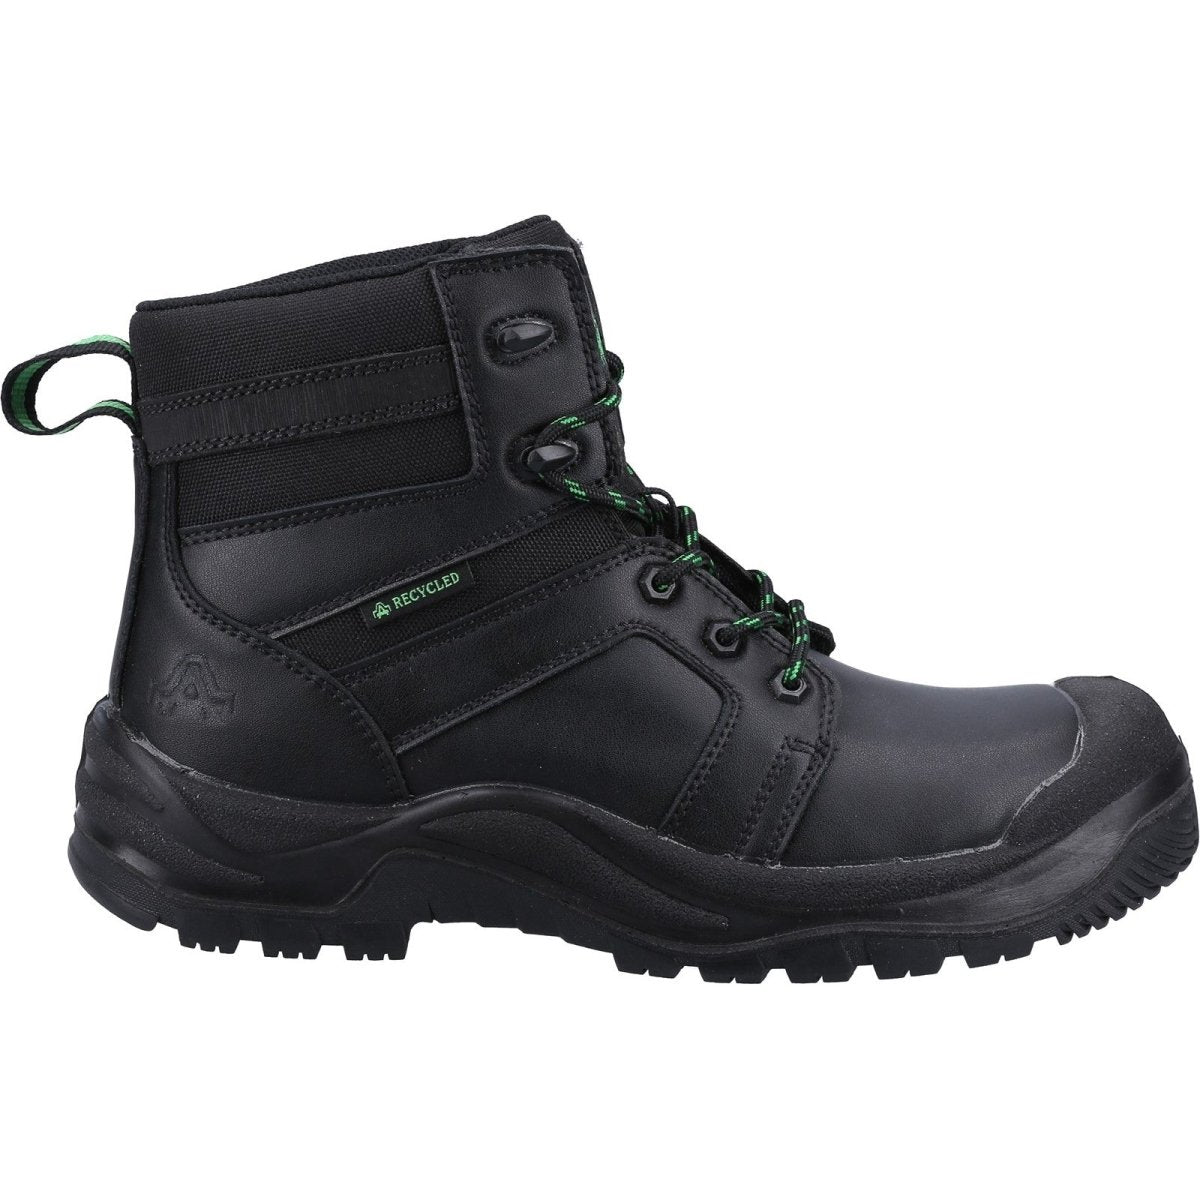 Amblers Safety 502 Safety Boots - Shoe Store Direct